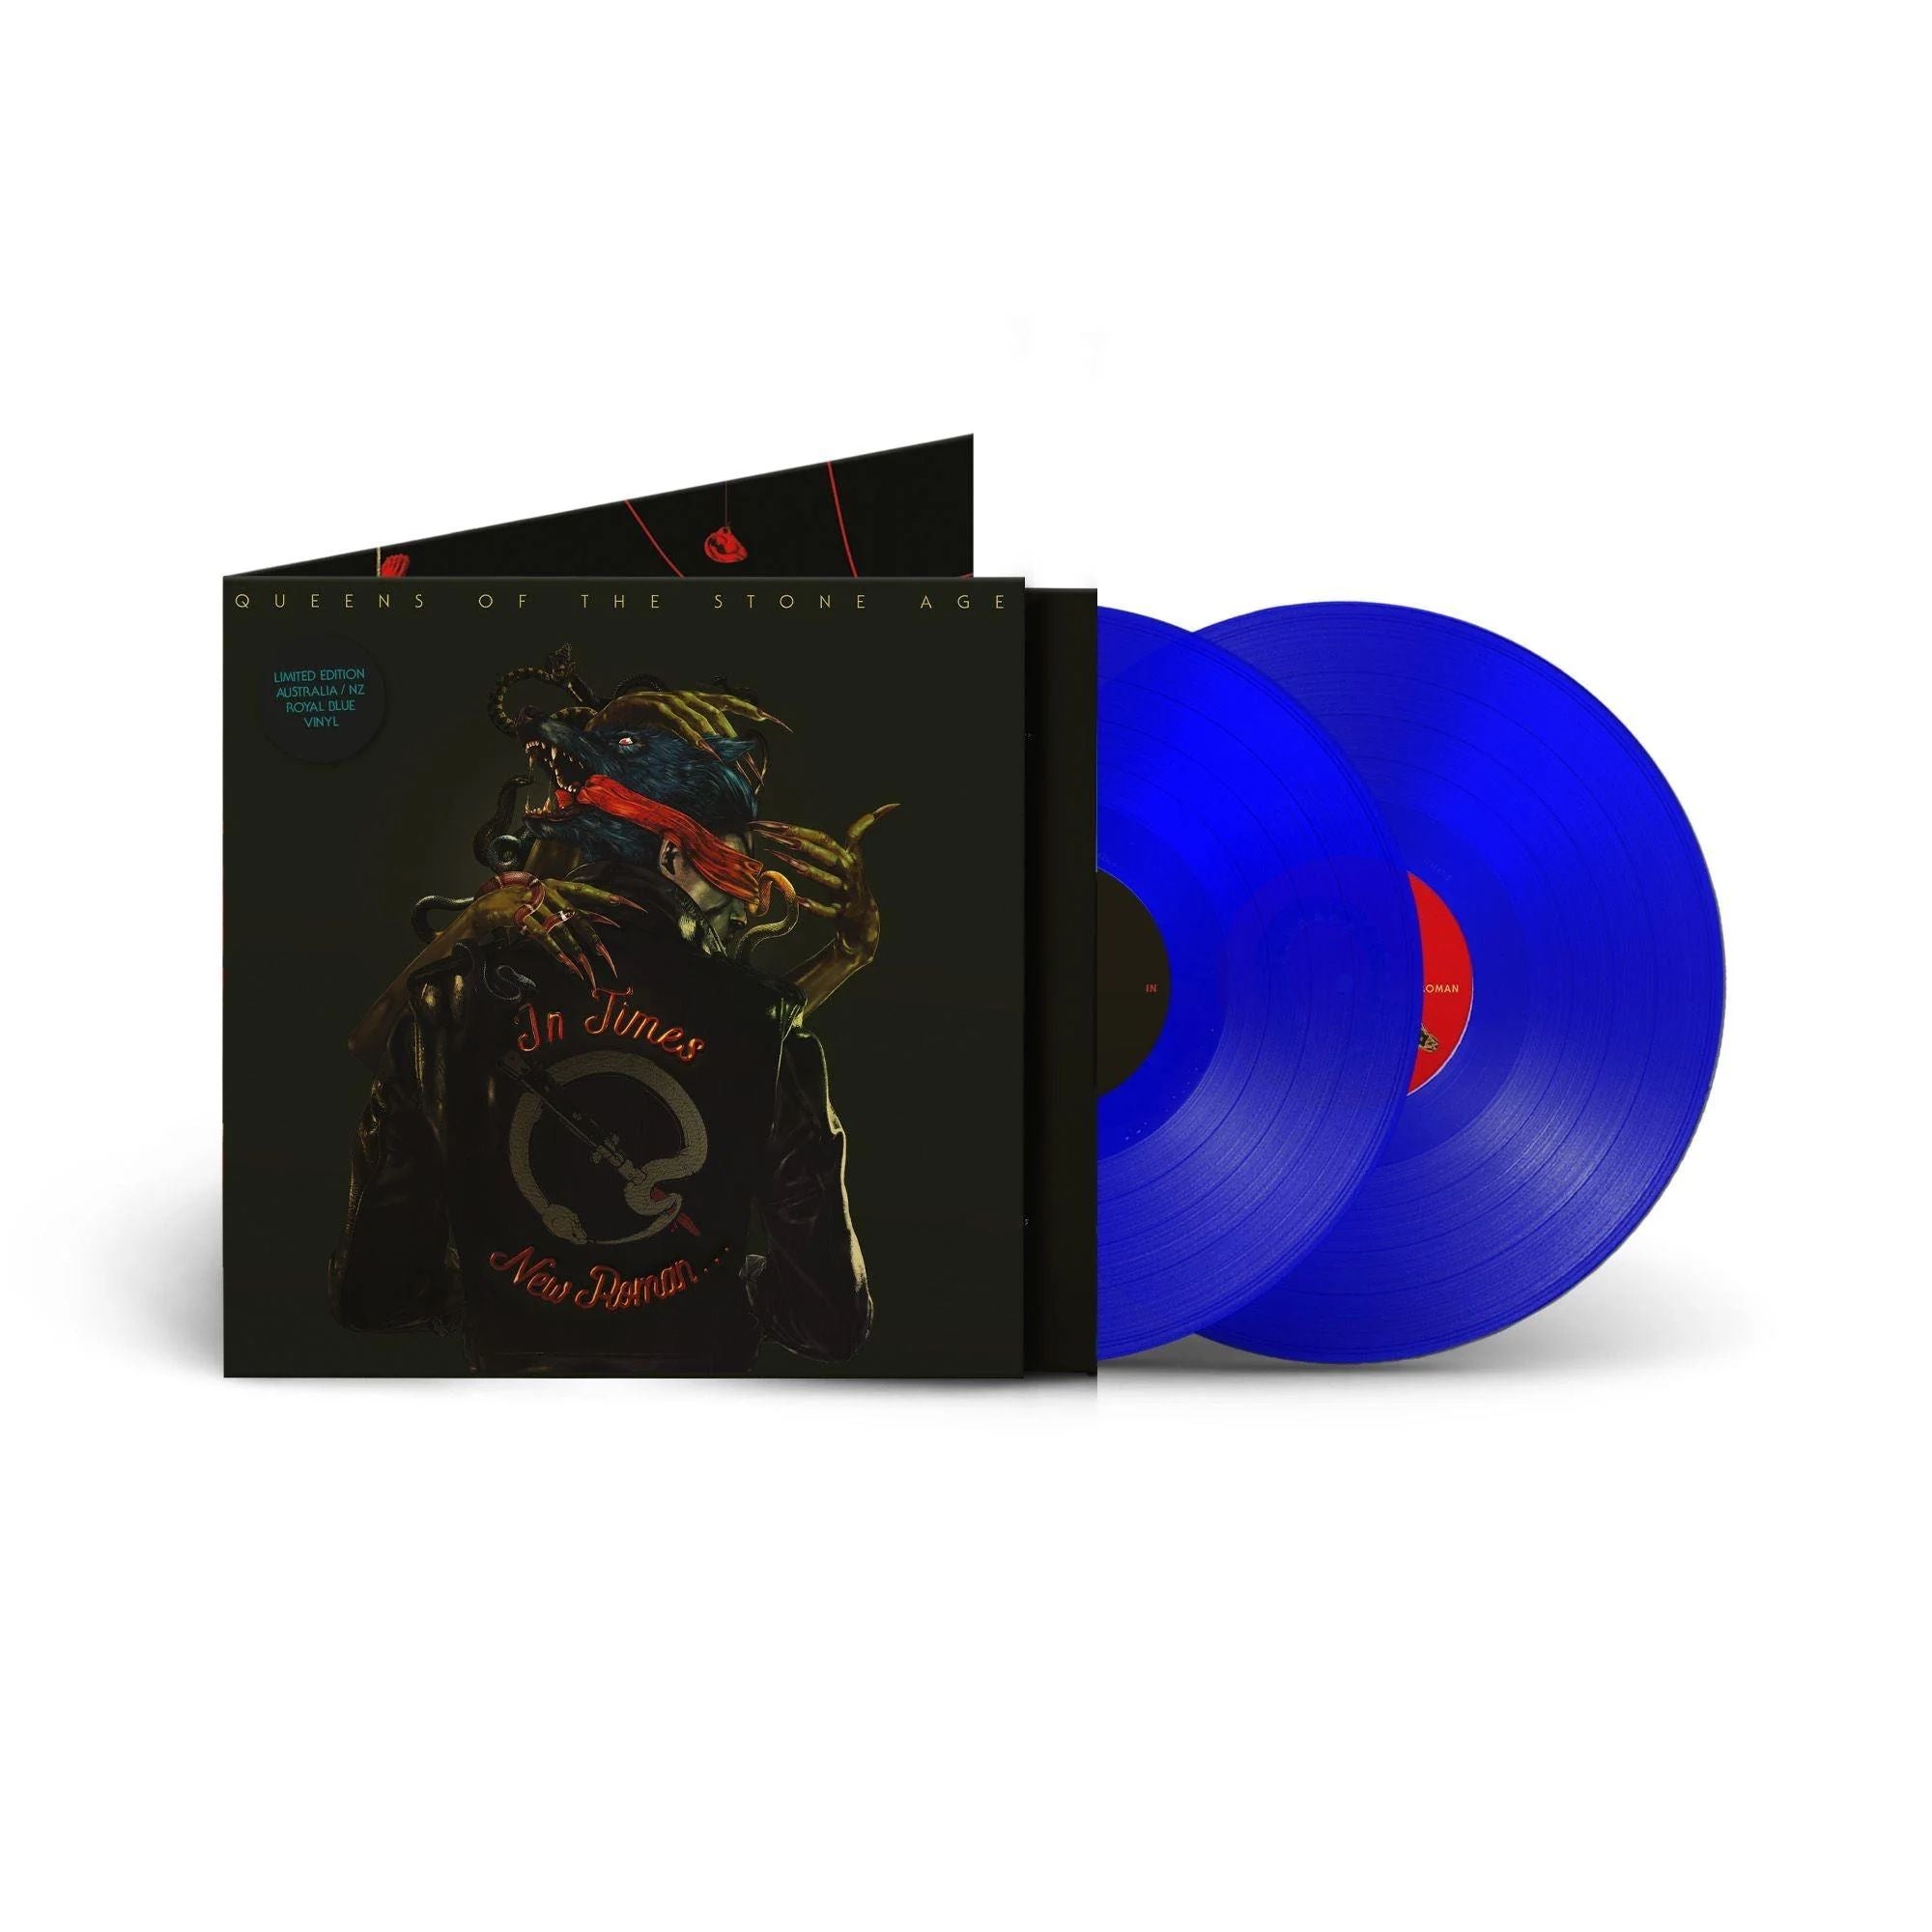 Queens Of The Stone Age - In Times New Roman? (Limited Tour Edition Australia/NZ Exclusive Royal Blue Vinyl) - Vinyl - New